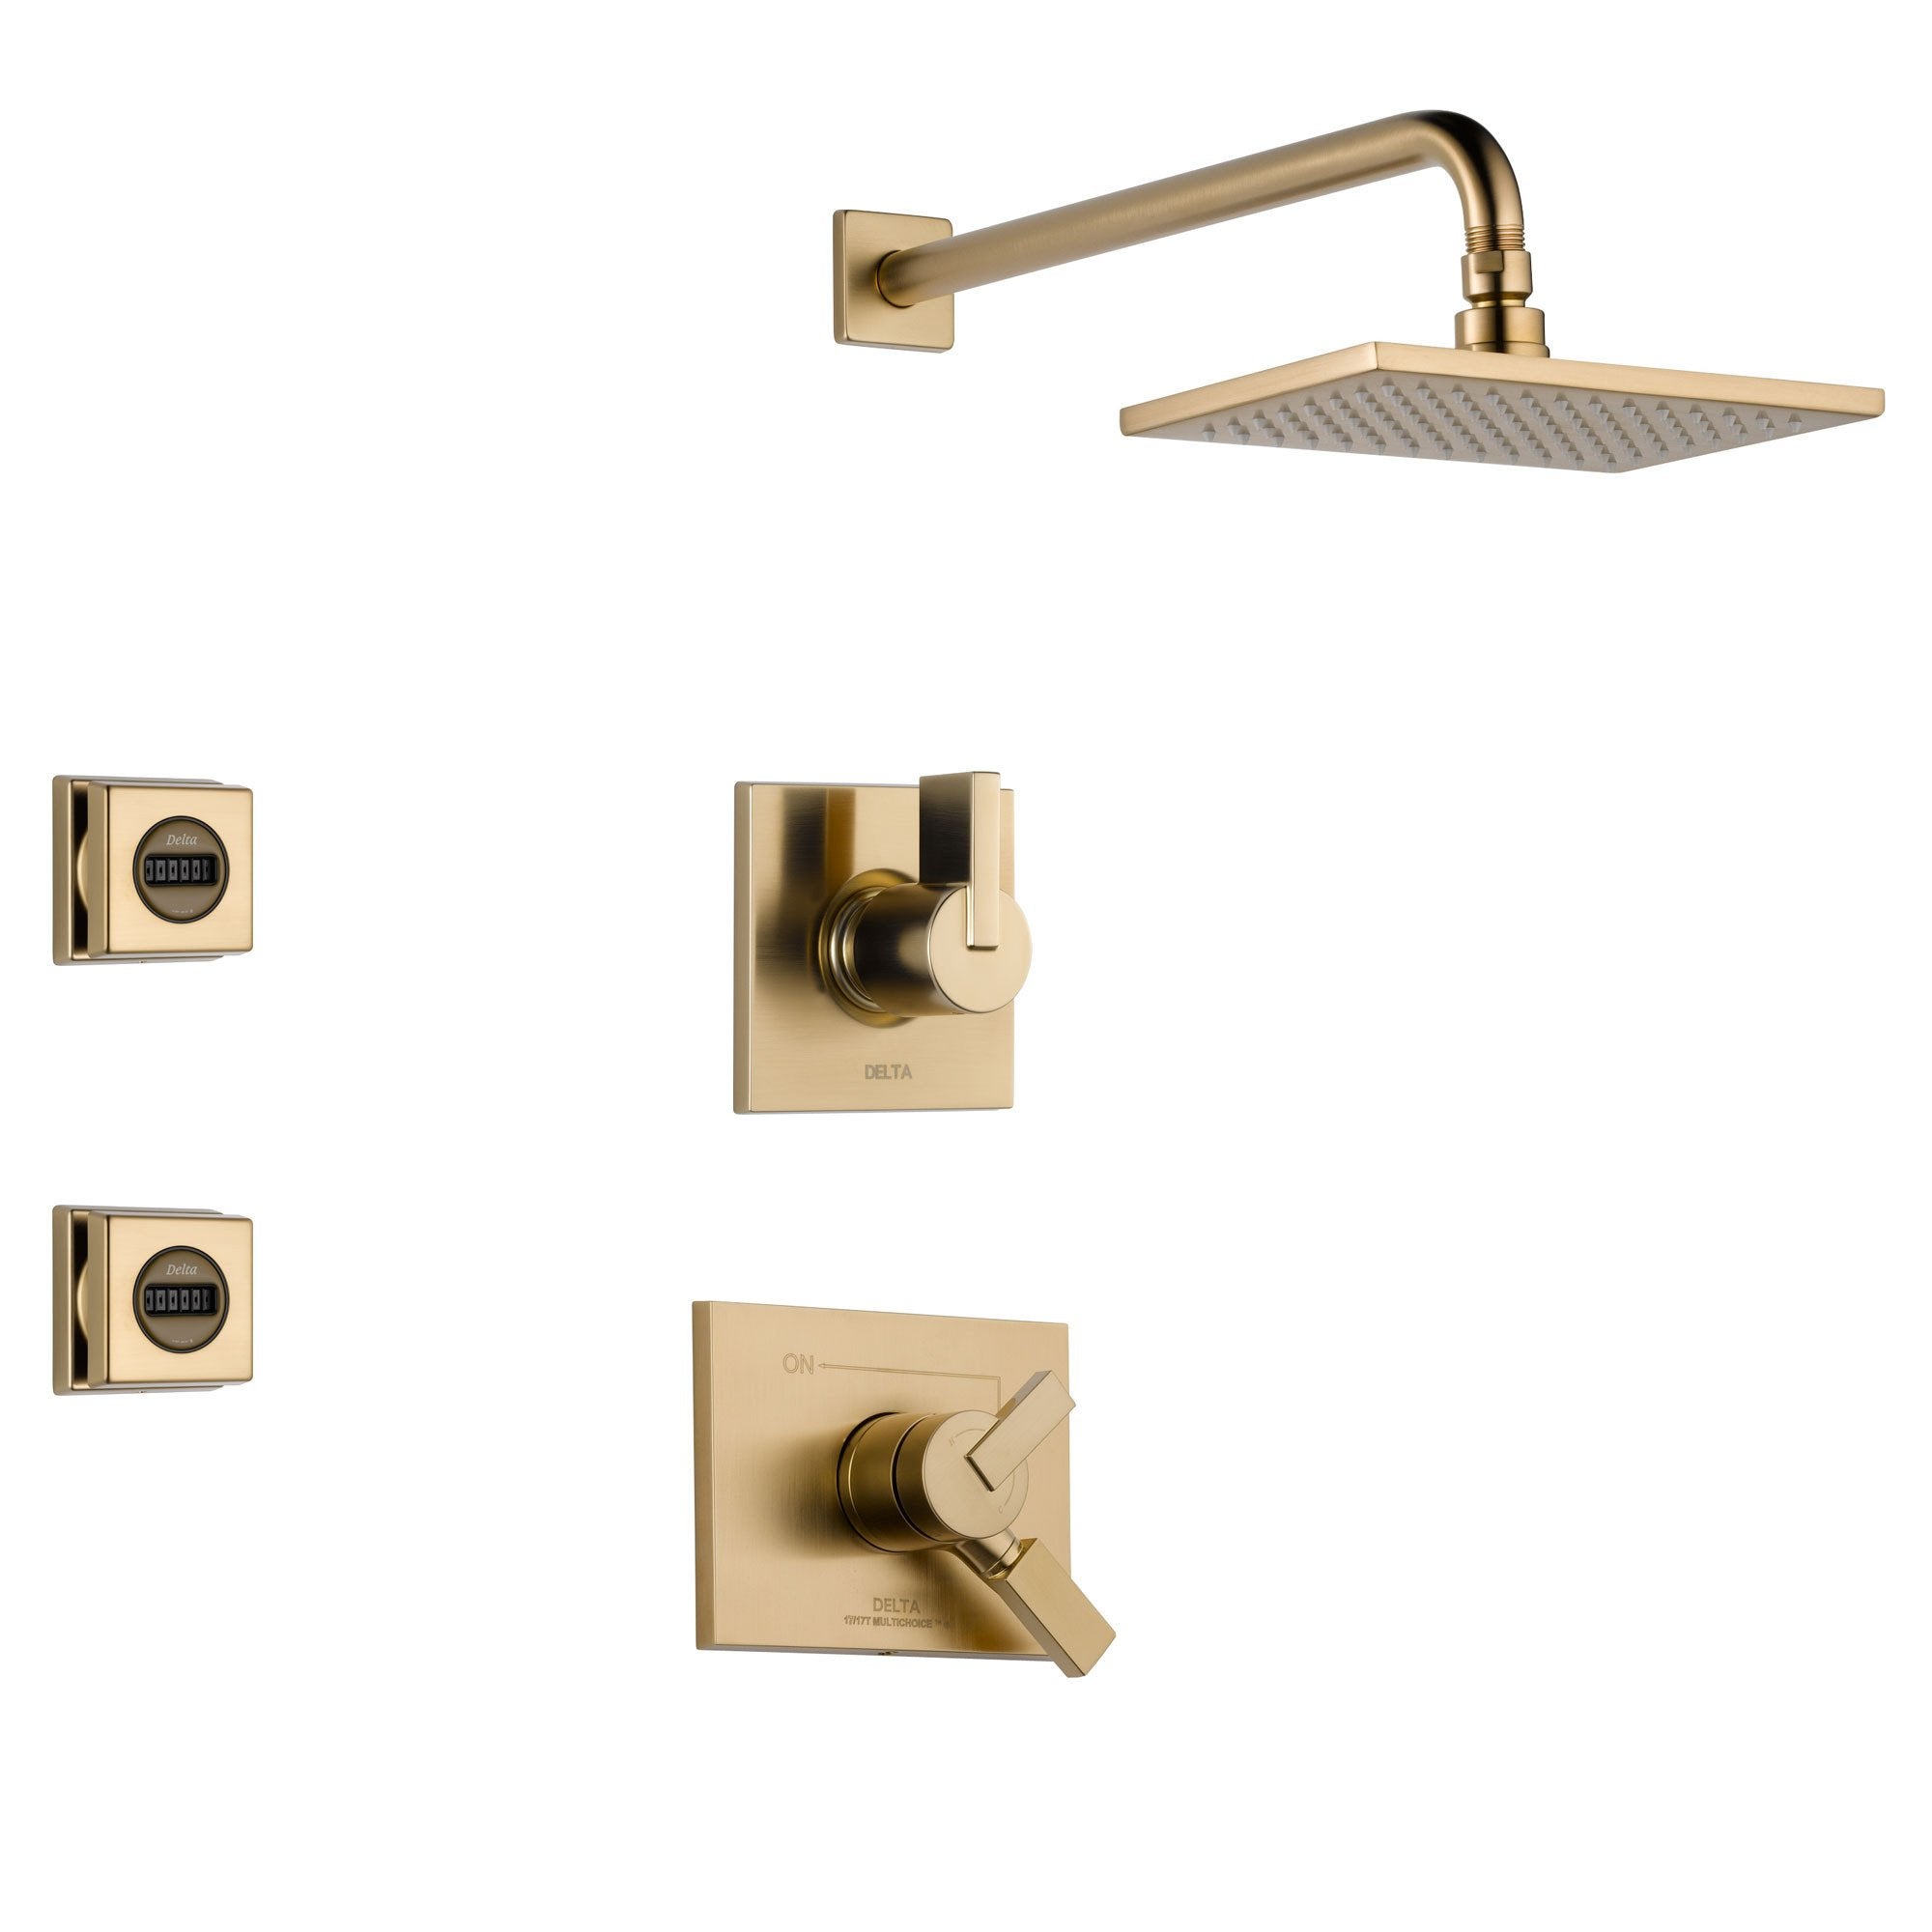 Delta Vero Champagne Bronze Shower System with Dual Control Shower Handle, 3-setting Diverter, Modern Square Large Rain Showerhead, and 2 Body Sprays SS175382CZ